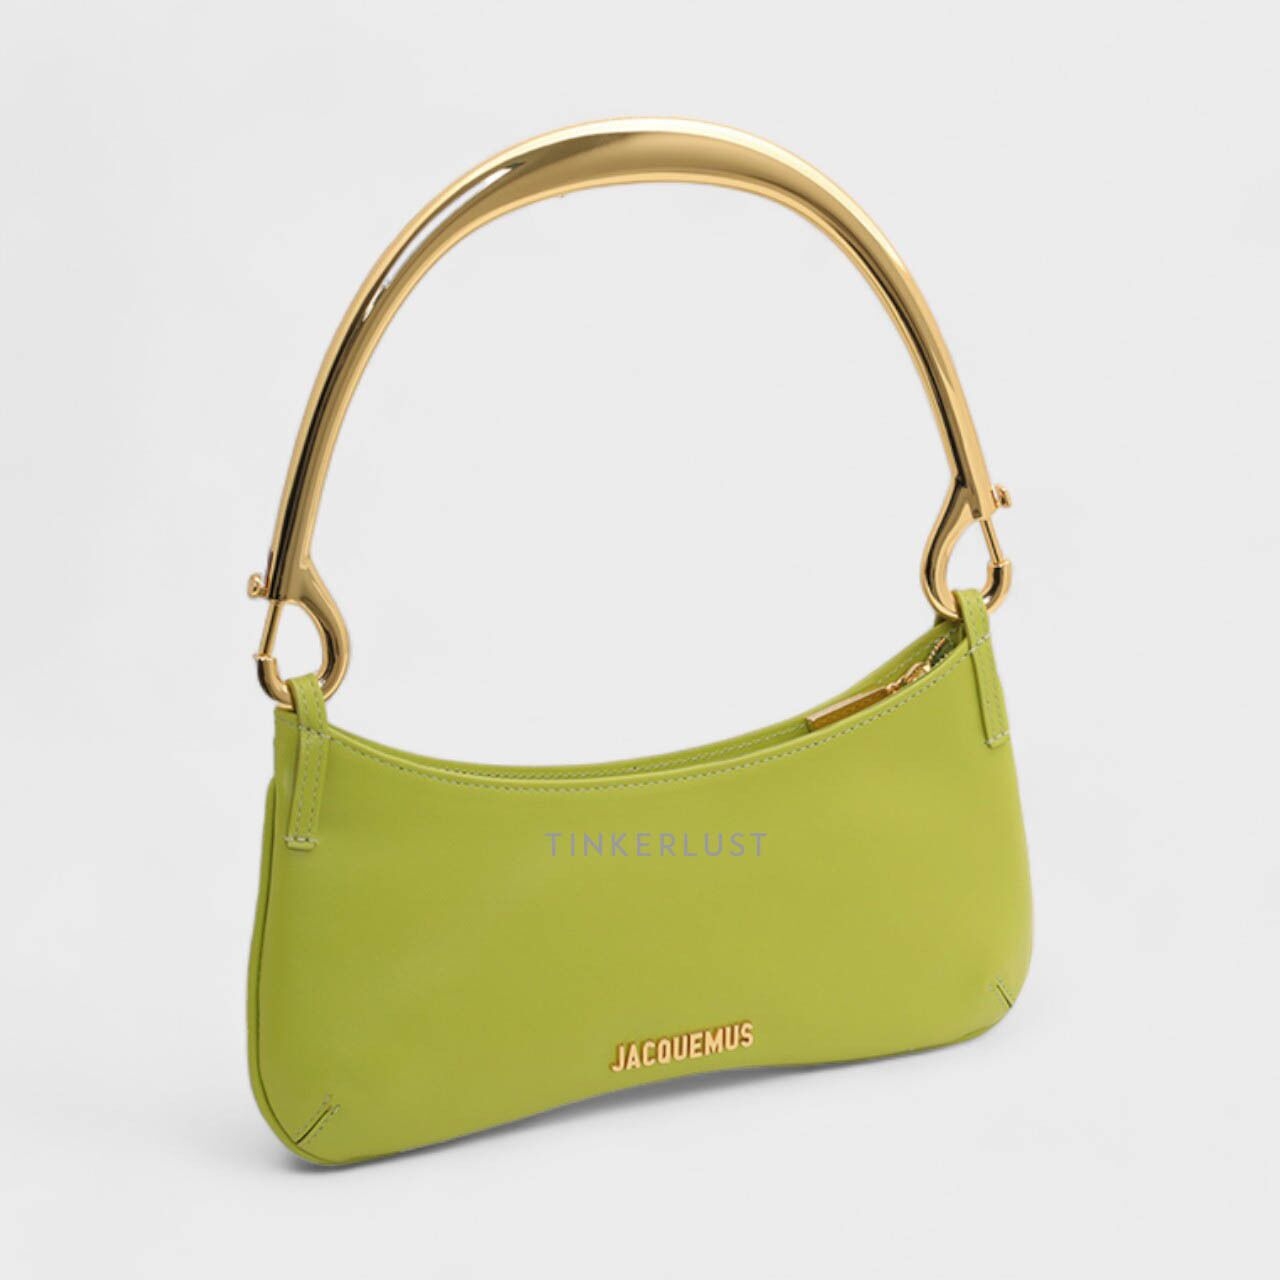 Jacquemus Le Bisou Mousqueton in Green with Carabiner Strap Shoulder Bag